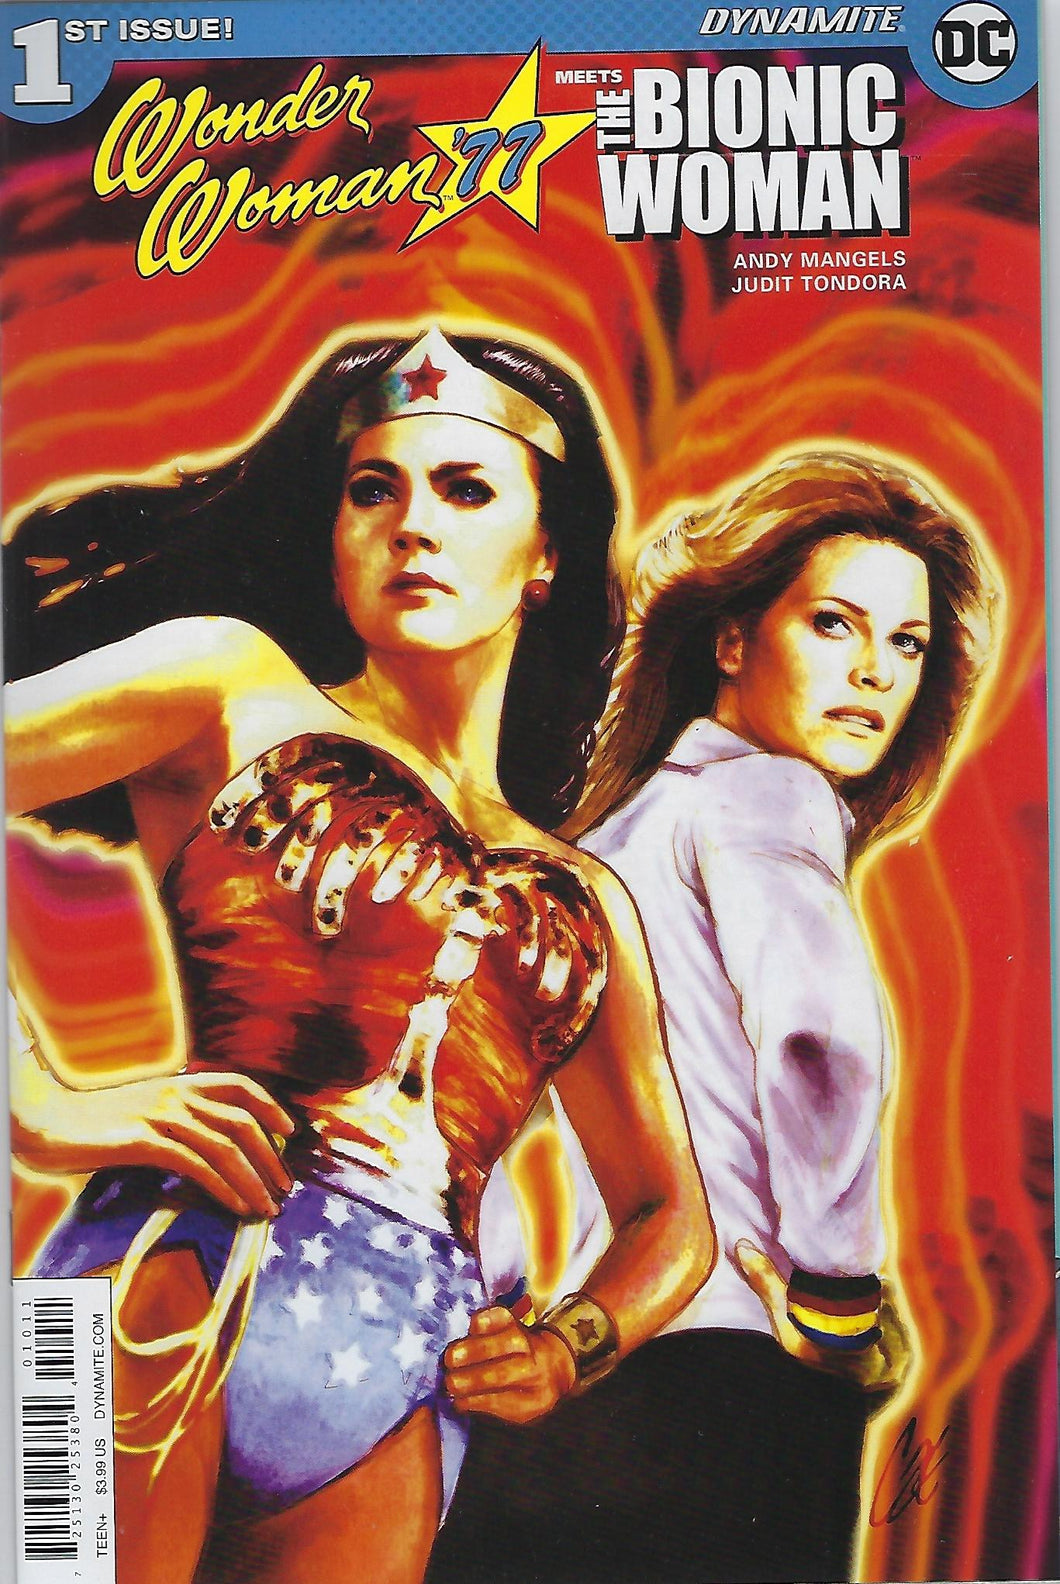 Wonder Woman '77 Meets the Bionic Woman #1 Cover 